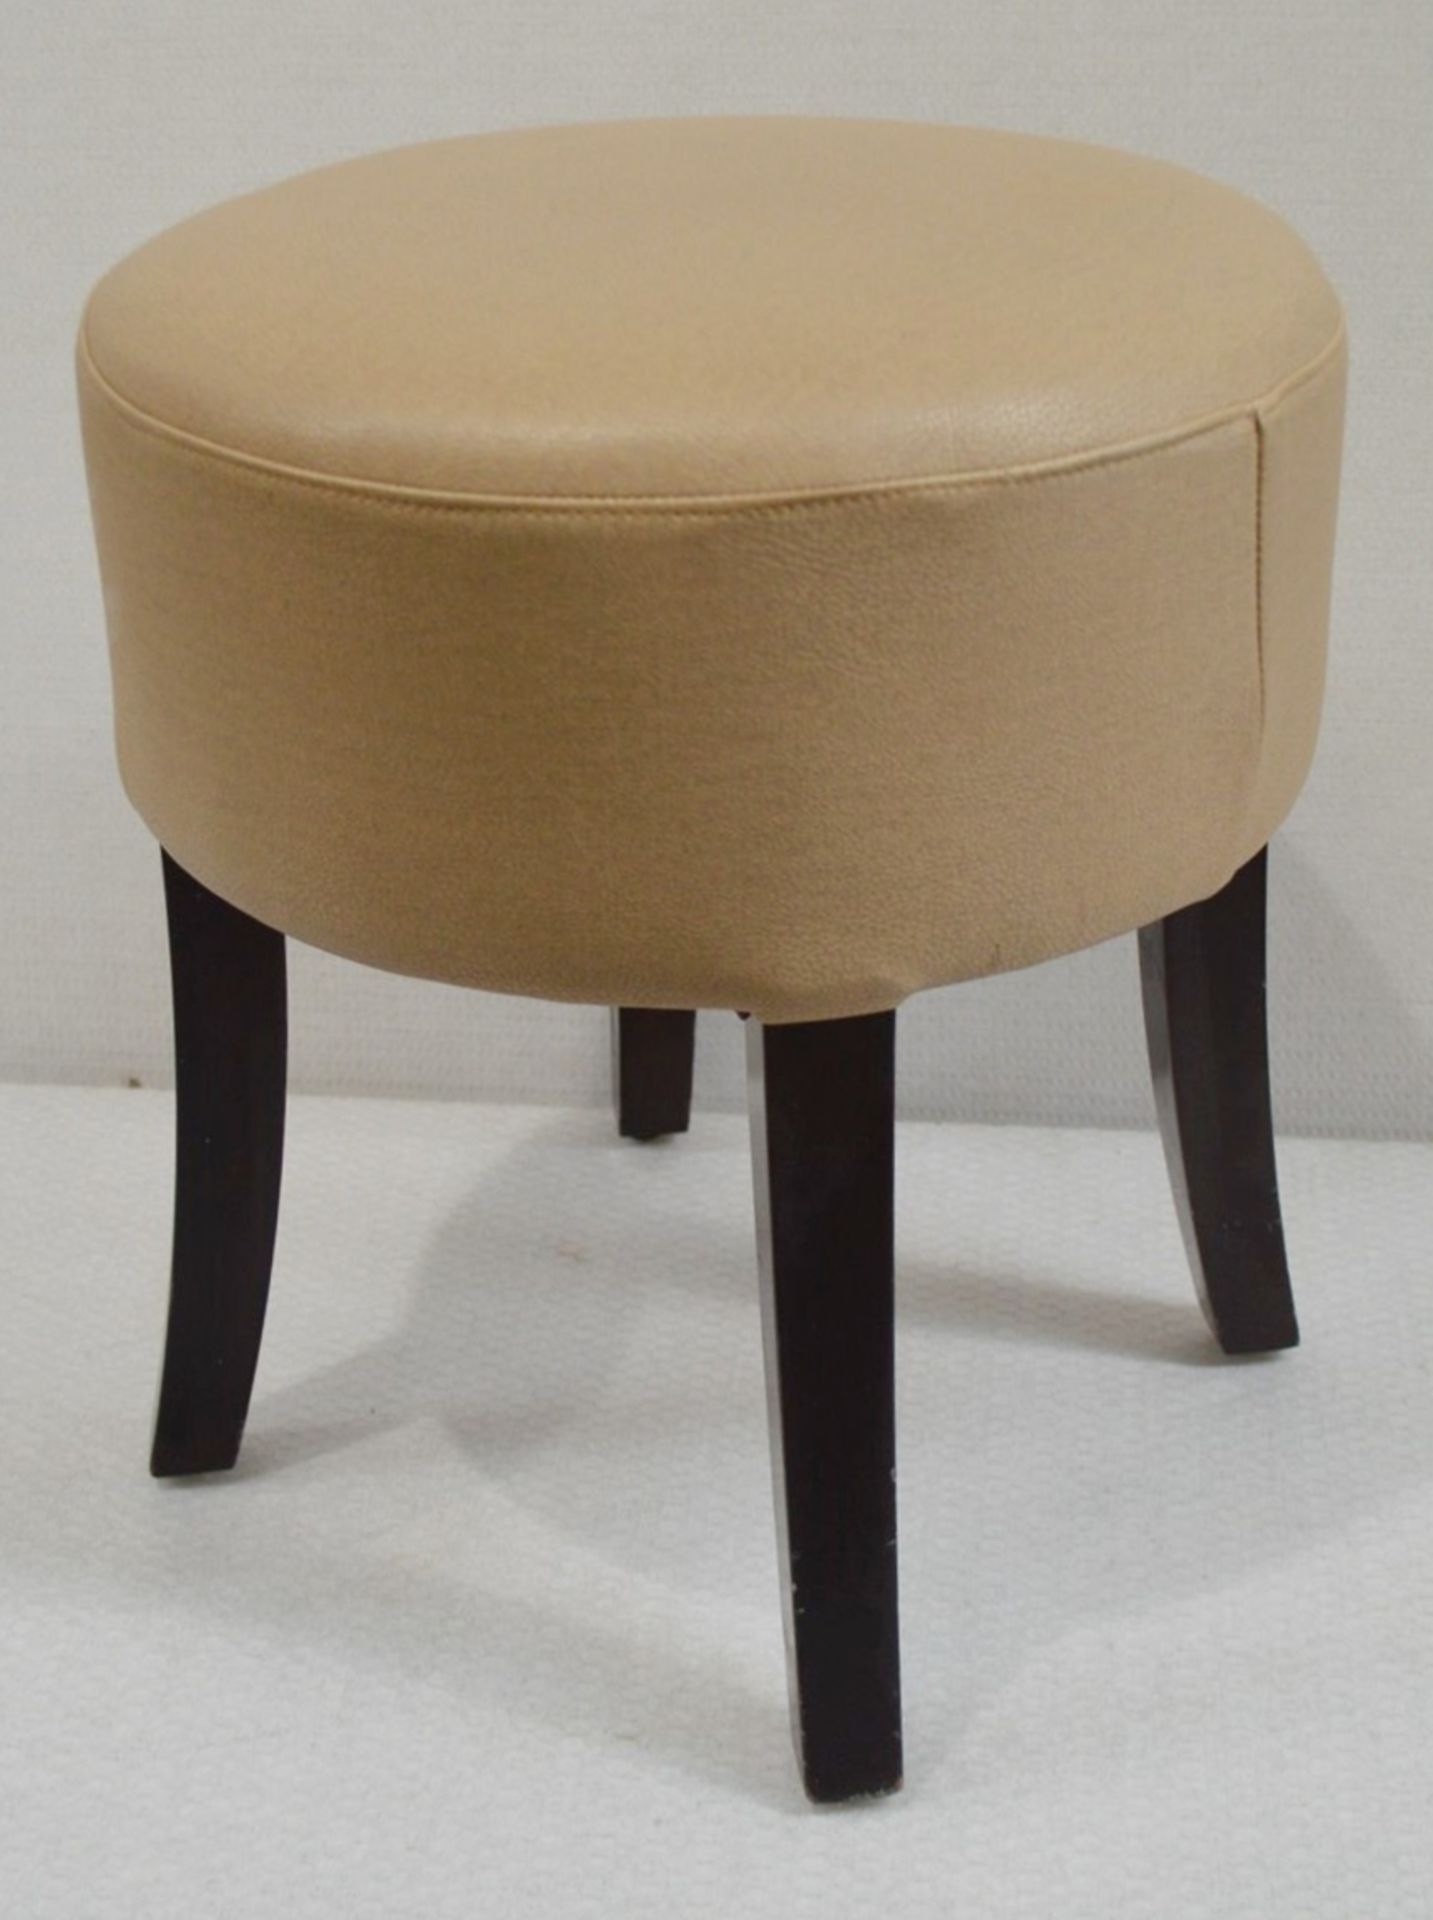 3 x Treatment Stools, All Upholstered In A Premium Mocha Coloured Faux Leather - Dimensions: - Image 3 of 5